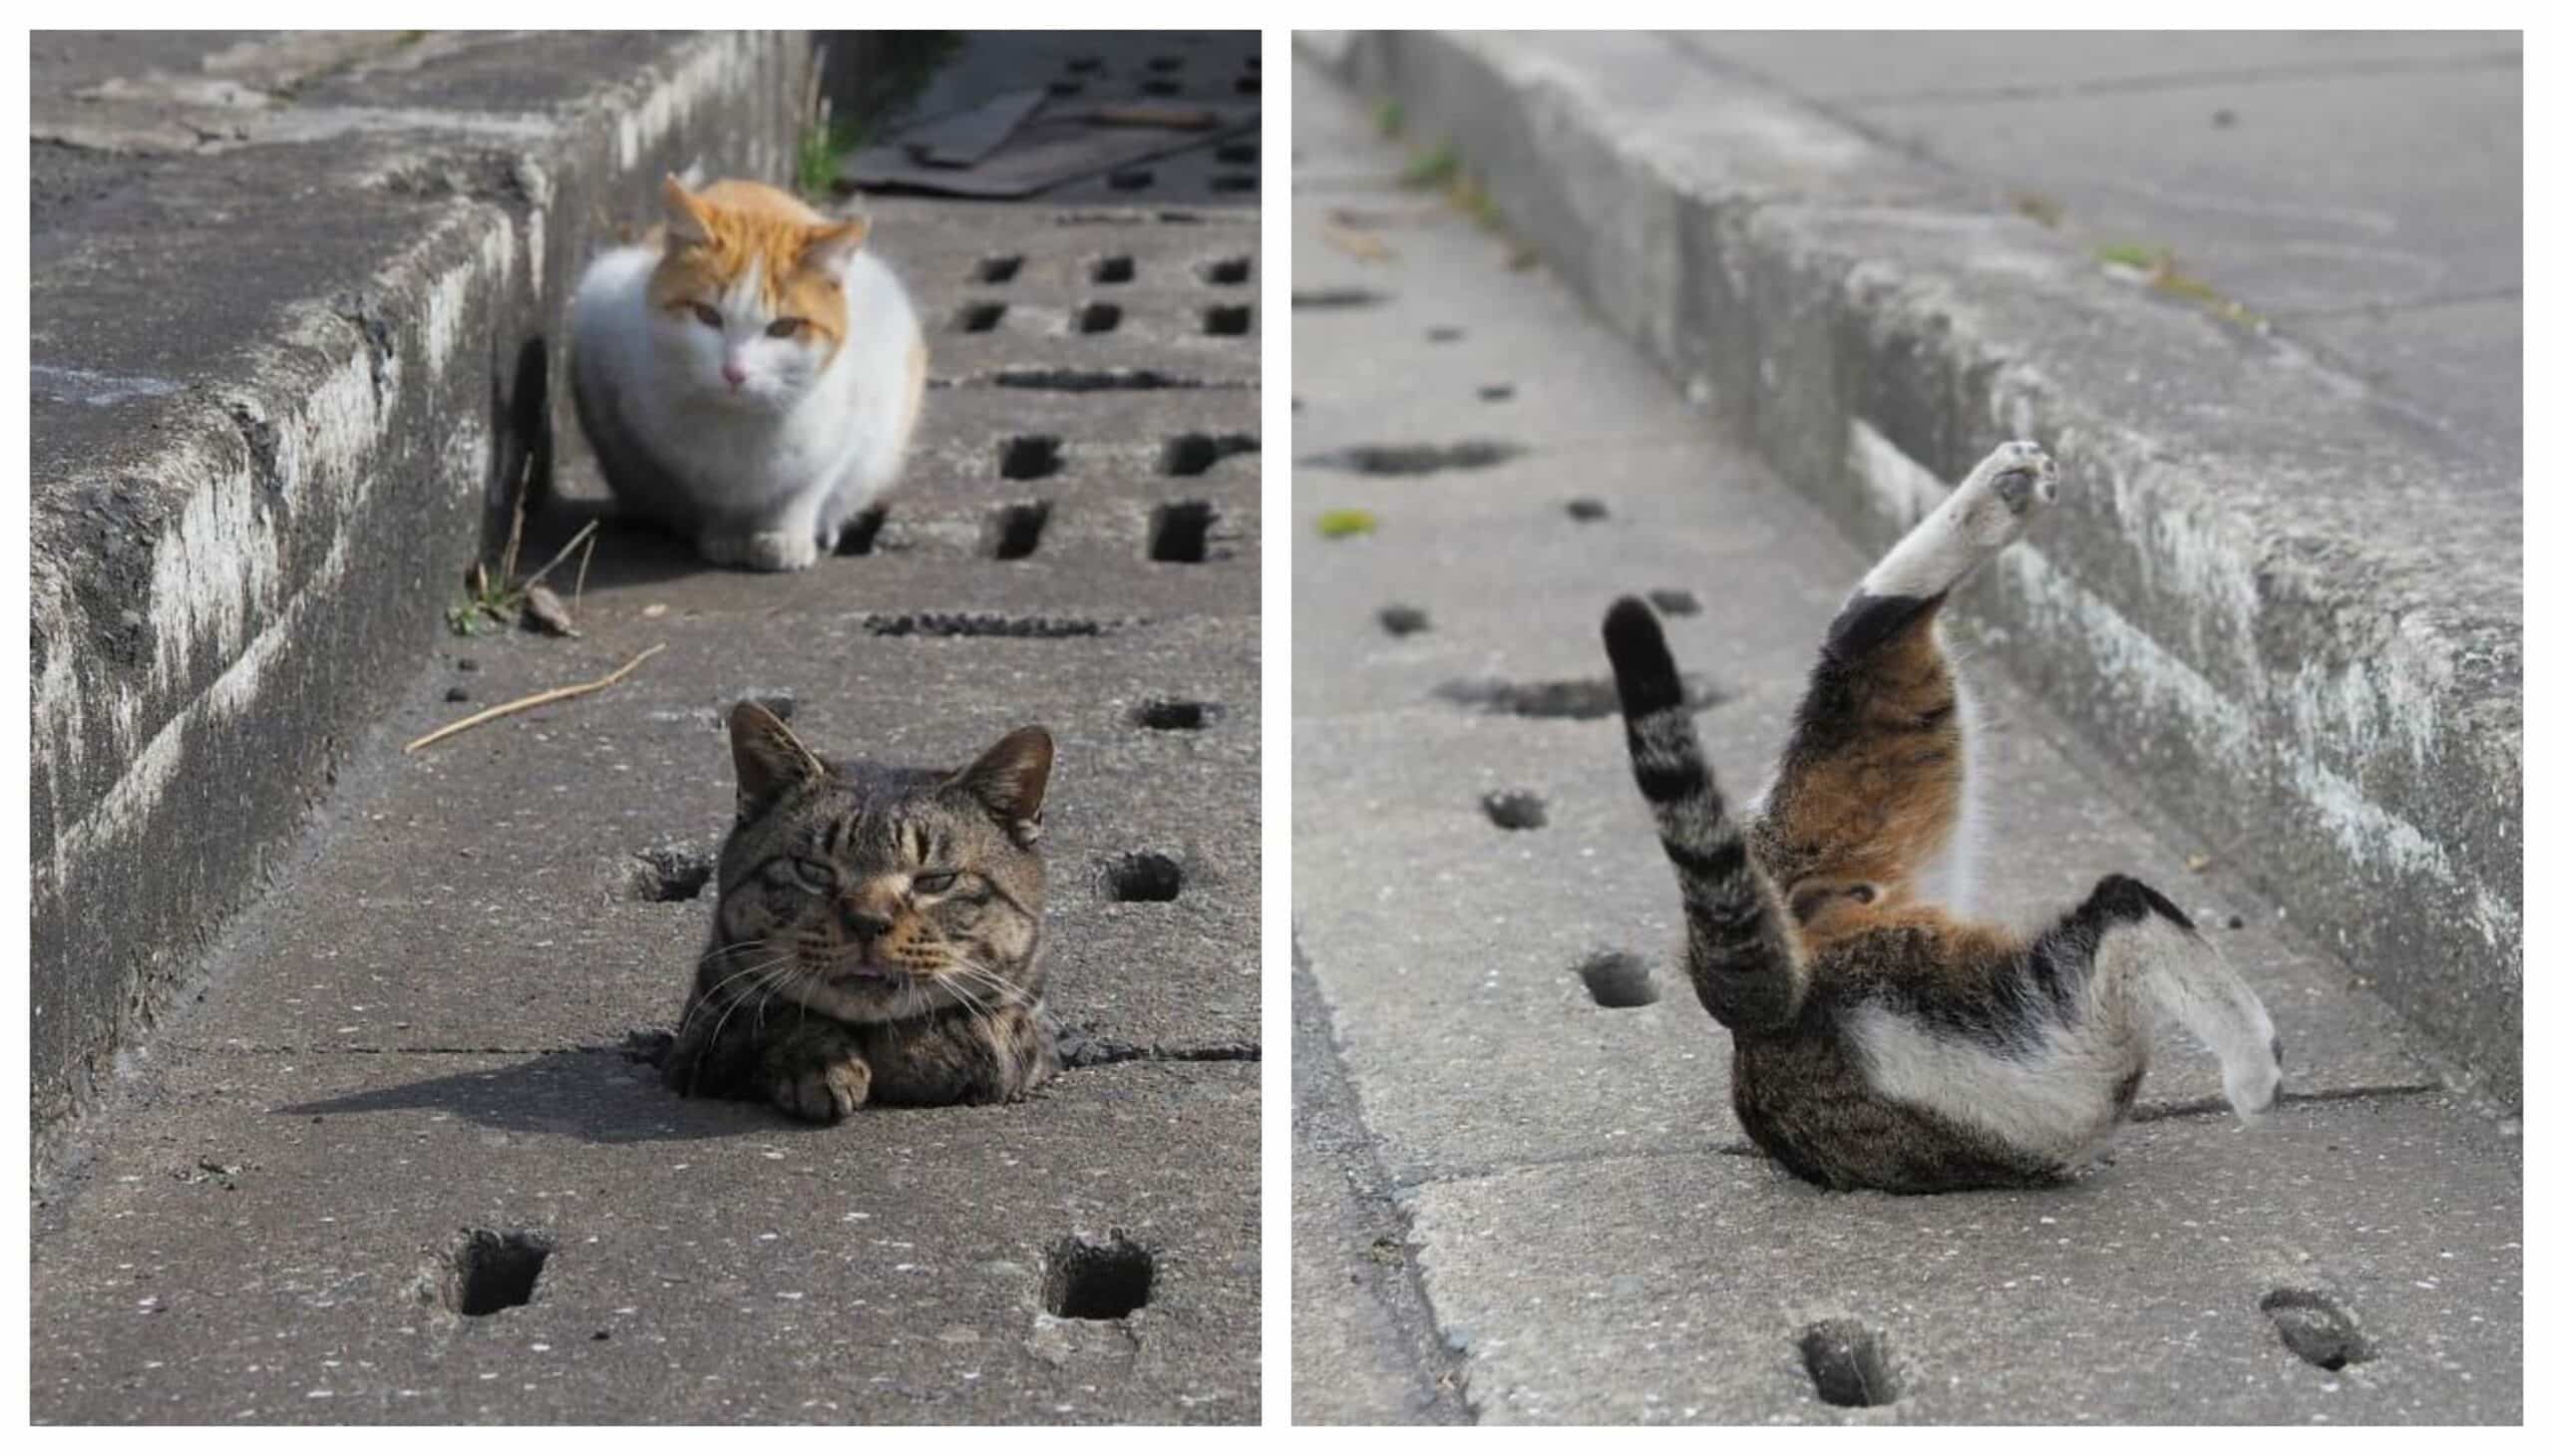 Stray cats find drain pipe holes and are now having the time of their lives